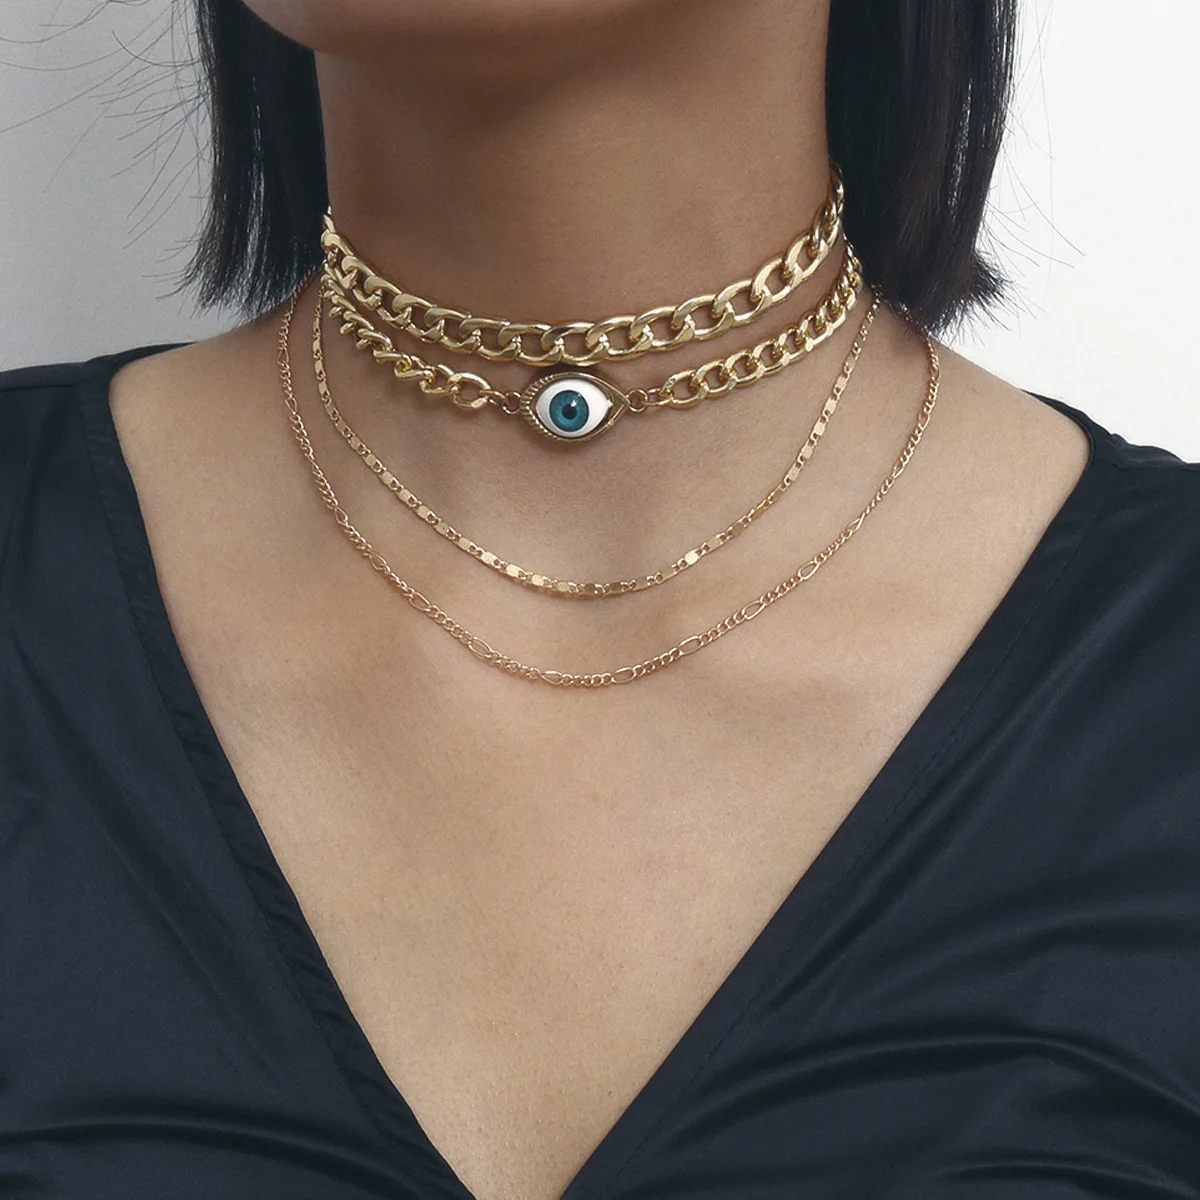 elegant pearl chokers necklace for women,custom multilayer gold plated cuban chain charm necklace lady jewelry oem